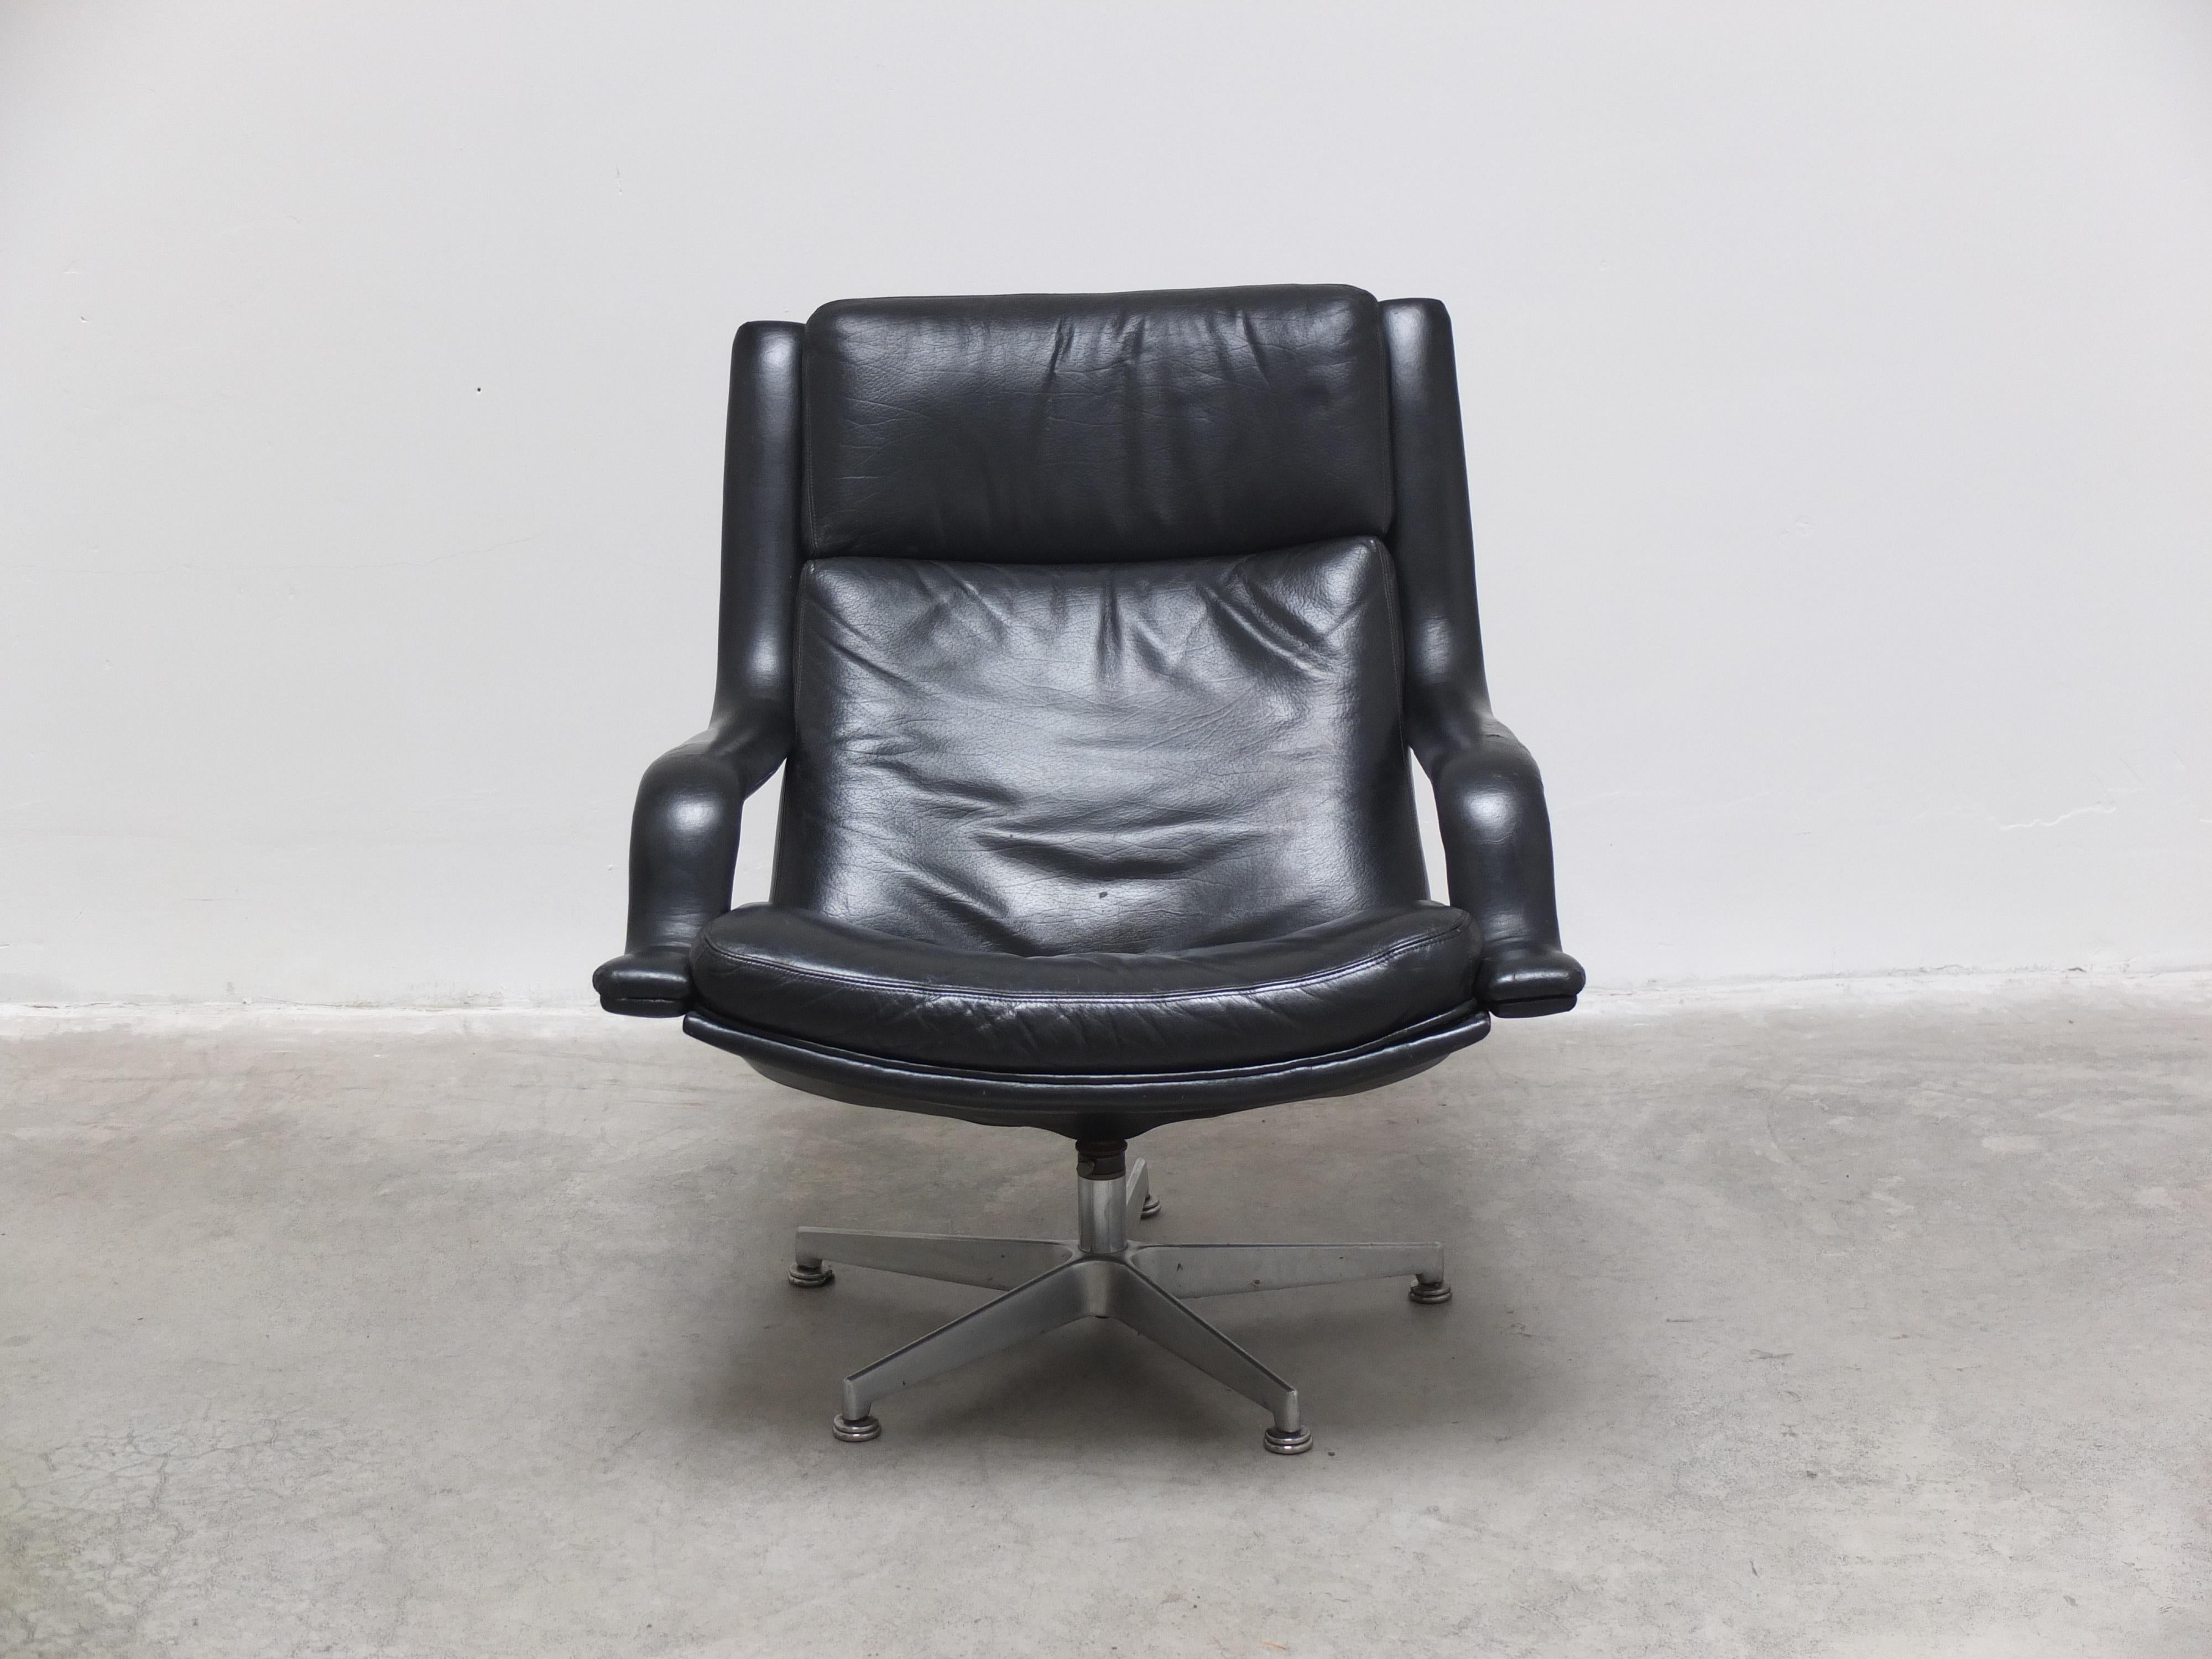 Leather 'F152' Swivel Lounge Chairs by Geoffrey Harcourt for Artifort, 1970s For Sale 6